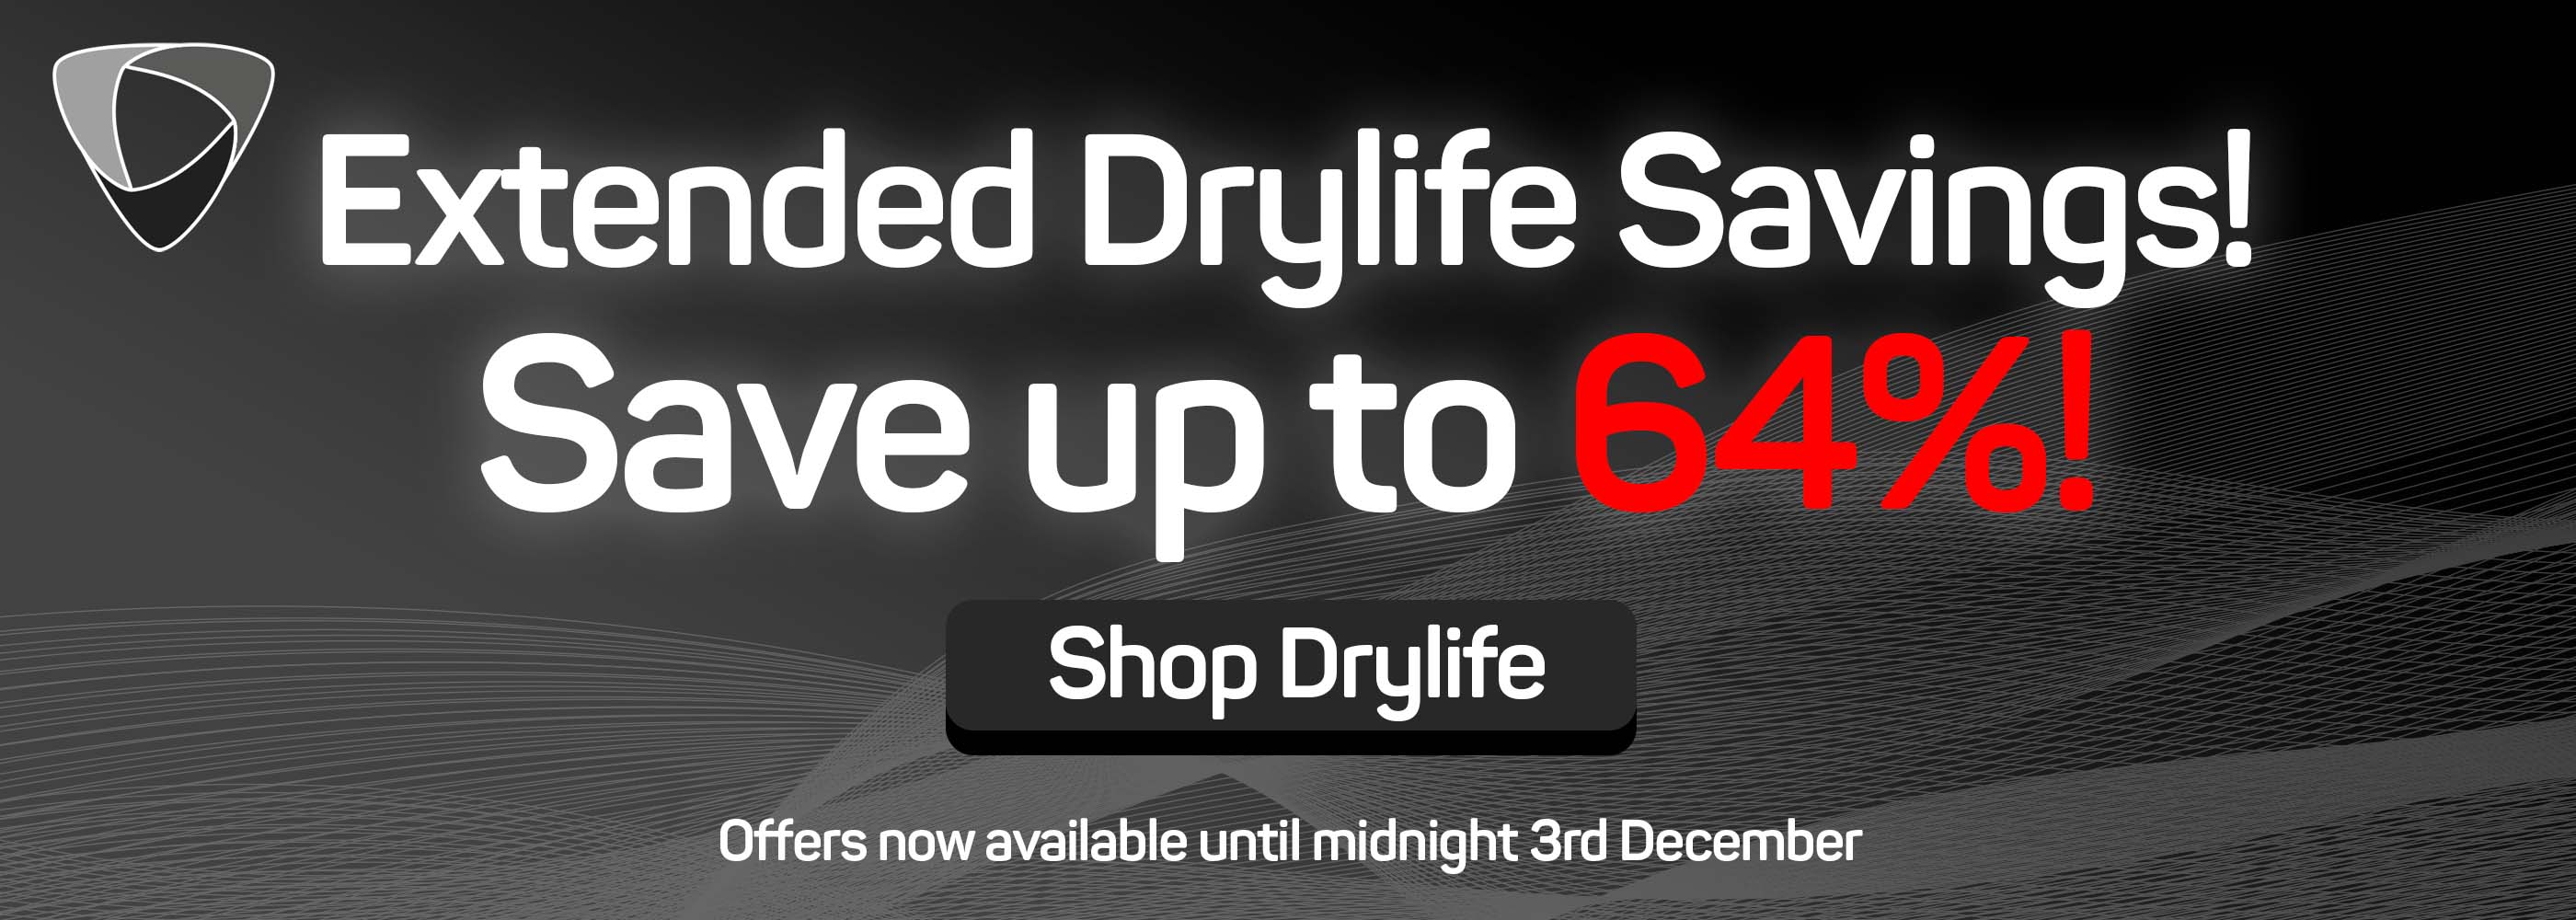 Save up to 64% off Drylife!